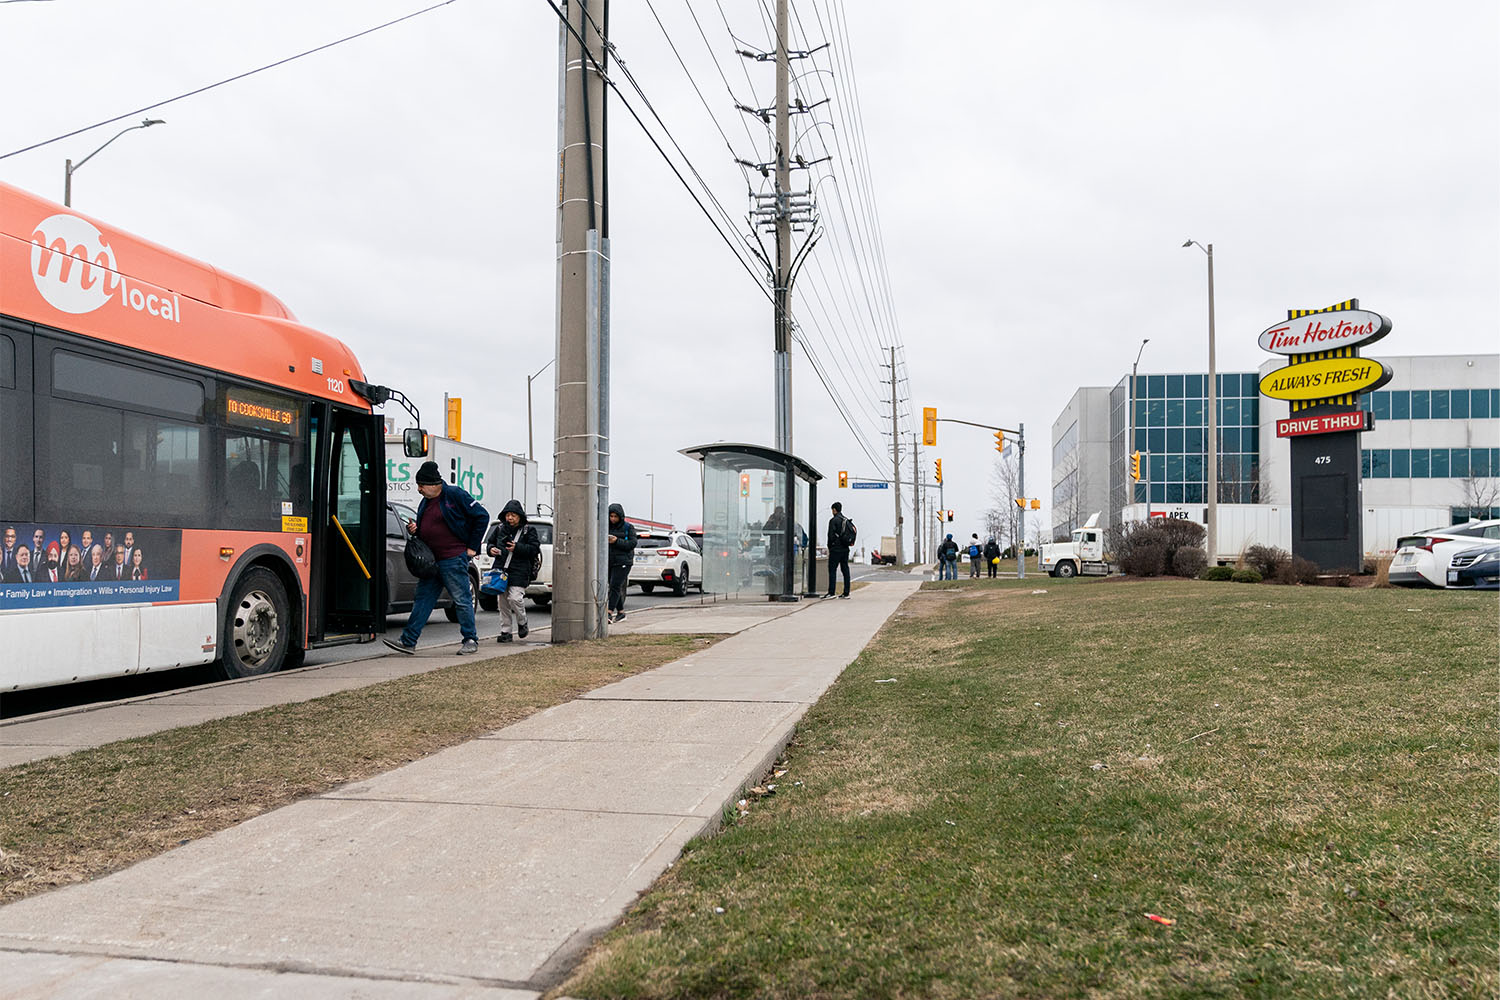 Commuters at the bus stop on Courtney Park Dr. E., not far from the Sterigenics facility in Mississauga.